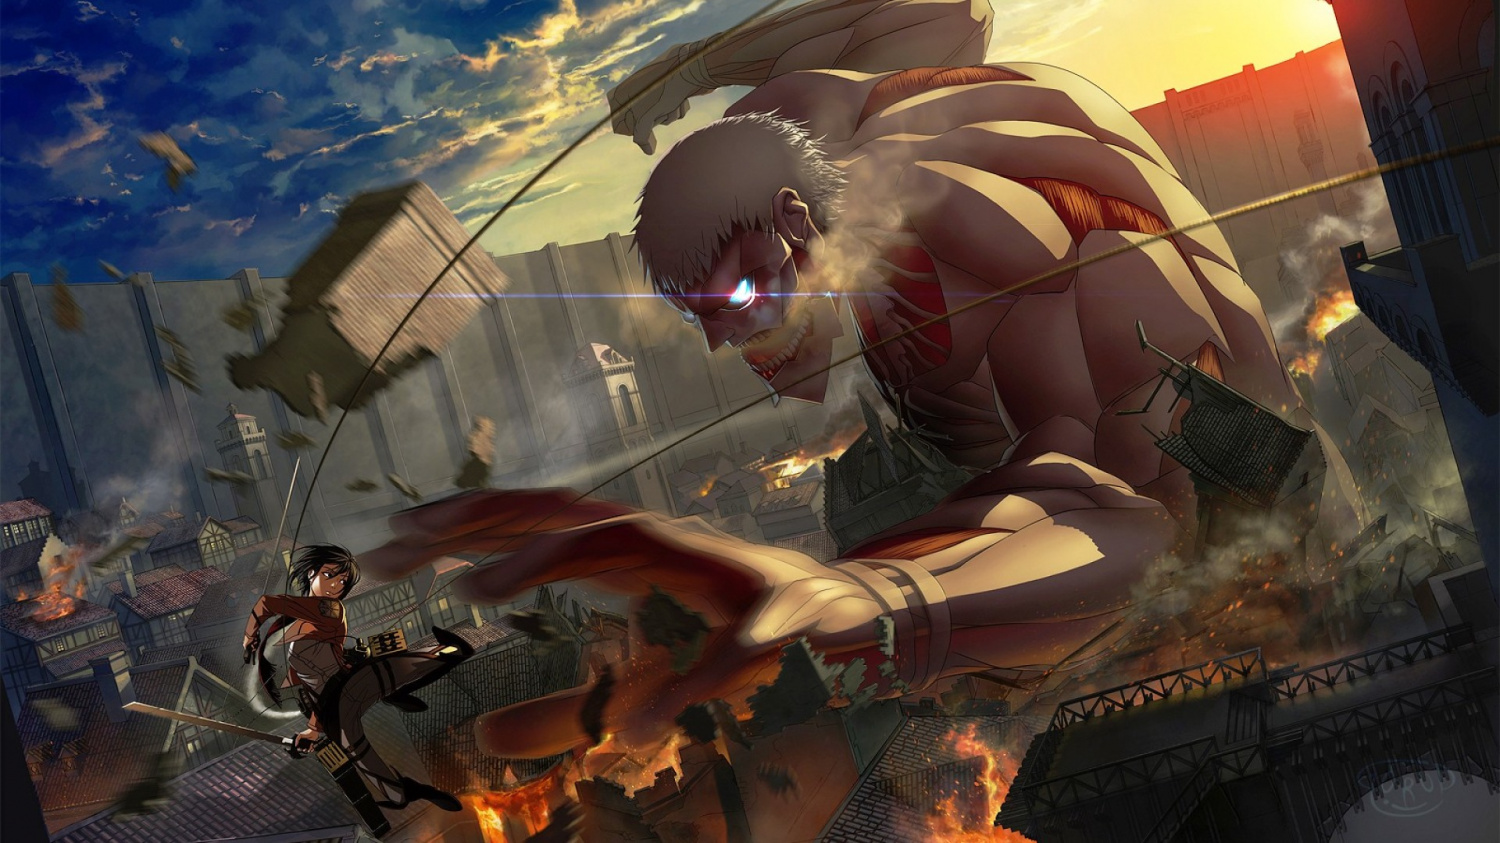 Attack On Titan Chapter 137 Release Date Spoilers The Plan To Kill Eren Attack on titan (進撃の巨人 shingeki no kyojin?, lit. attack on titan chapter 137 release